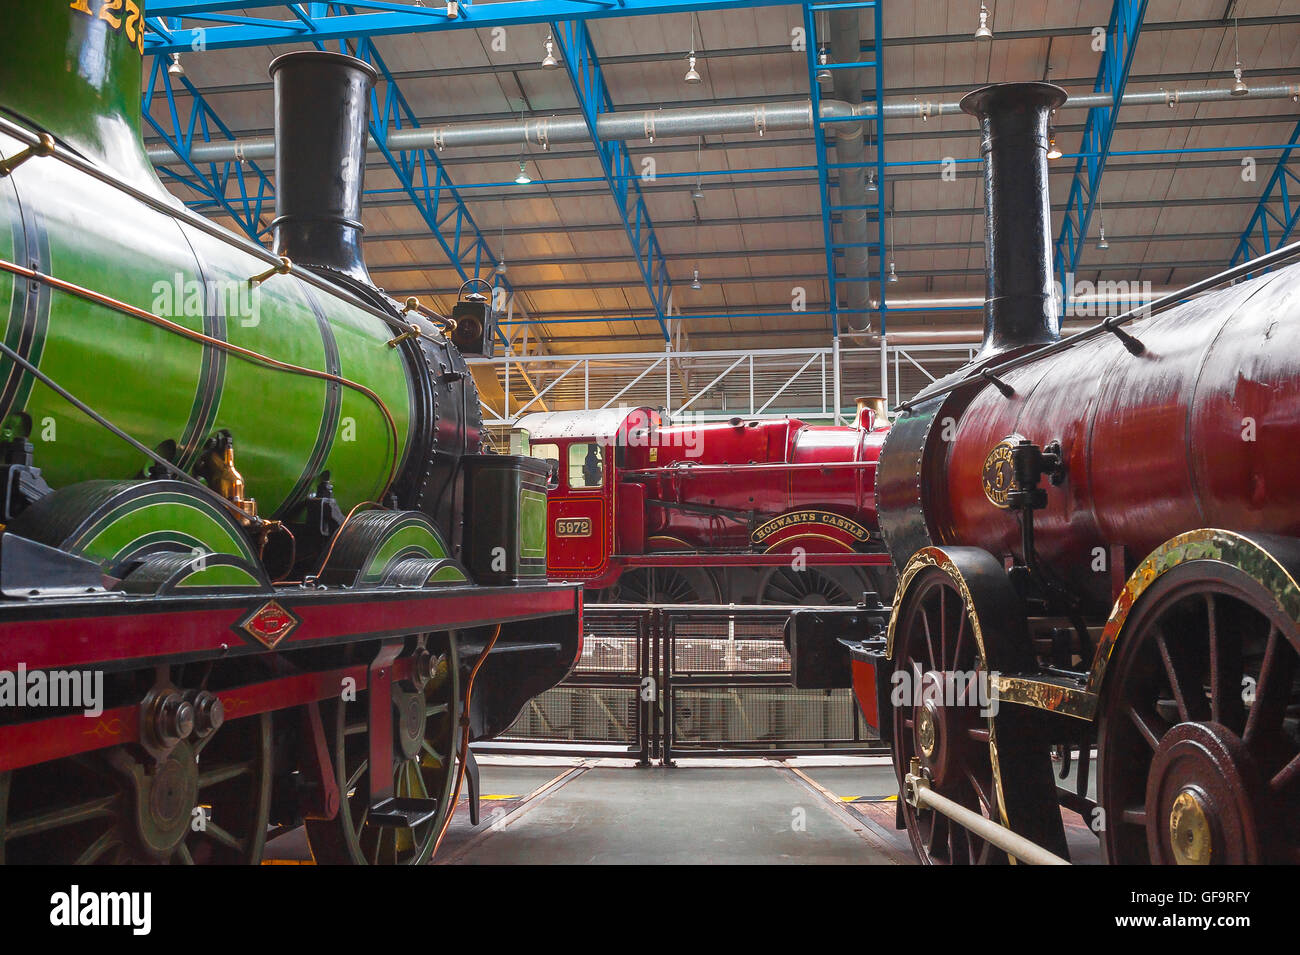 York Railway Museum, a view of three vintage steam locomotive trains in the York Railway Museum, England. Stock Photo